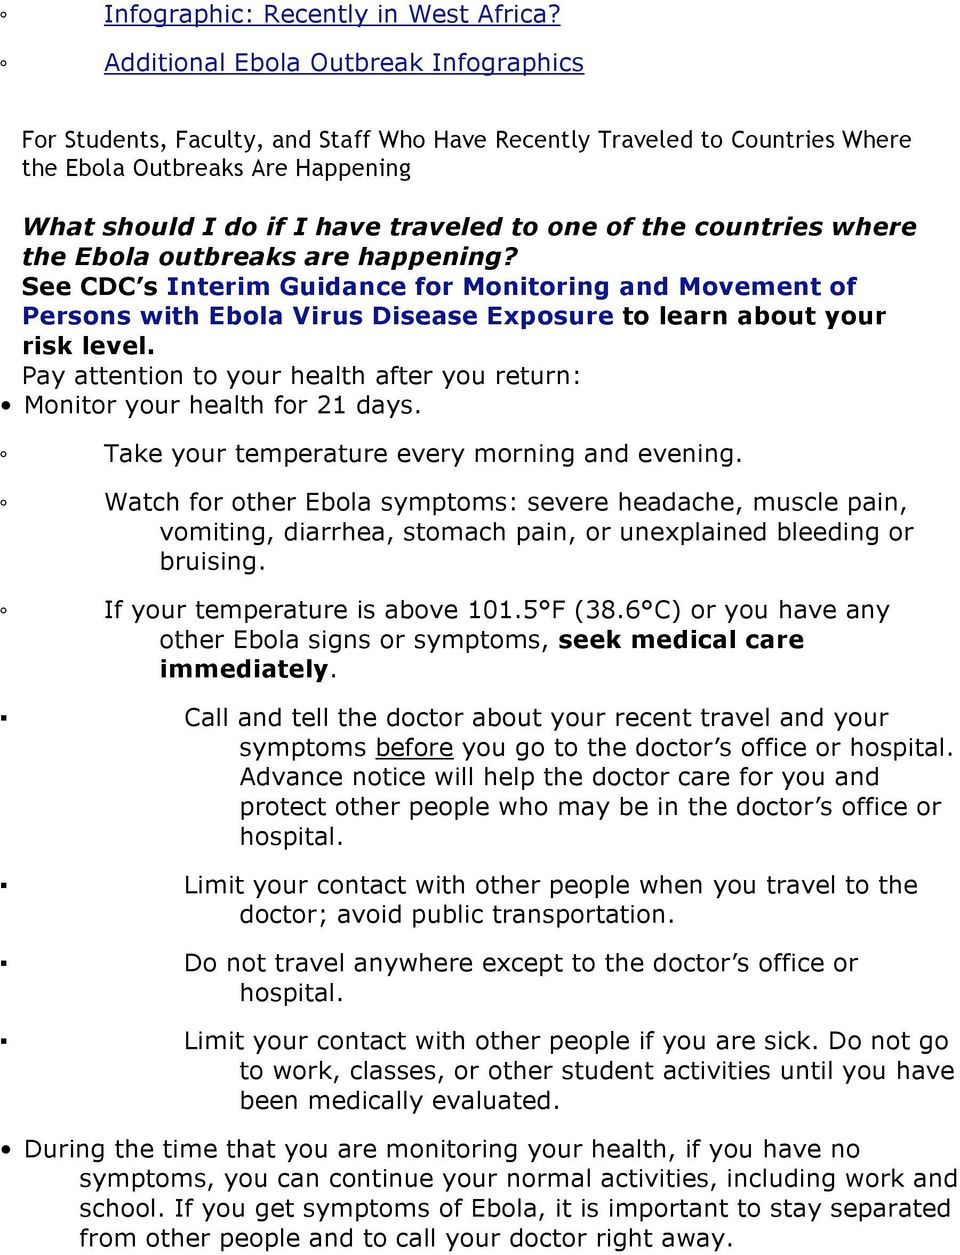 the countries where the Ebola outbreaks are happening? See CDC s Interim Guidance for Monitoring and Movement of Persons with Ebola Virus Disease Exposure to learn about your risk level.